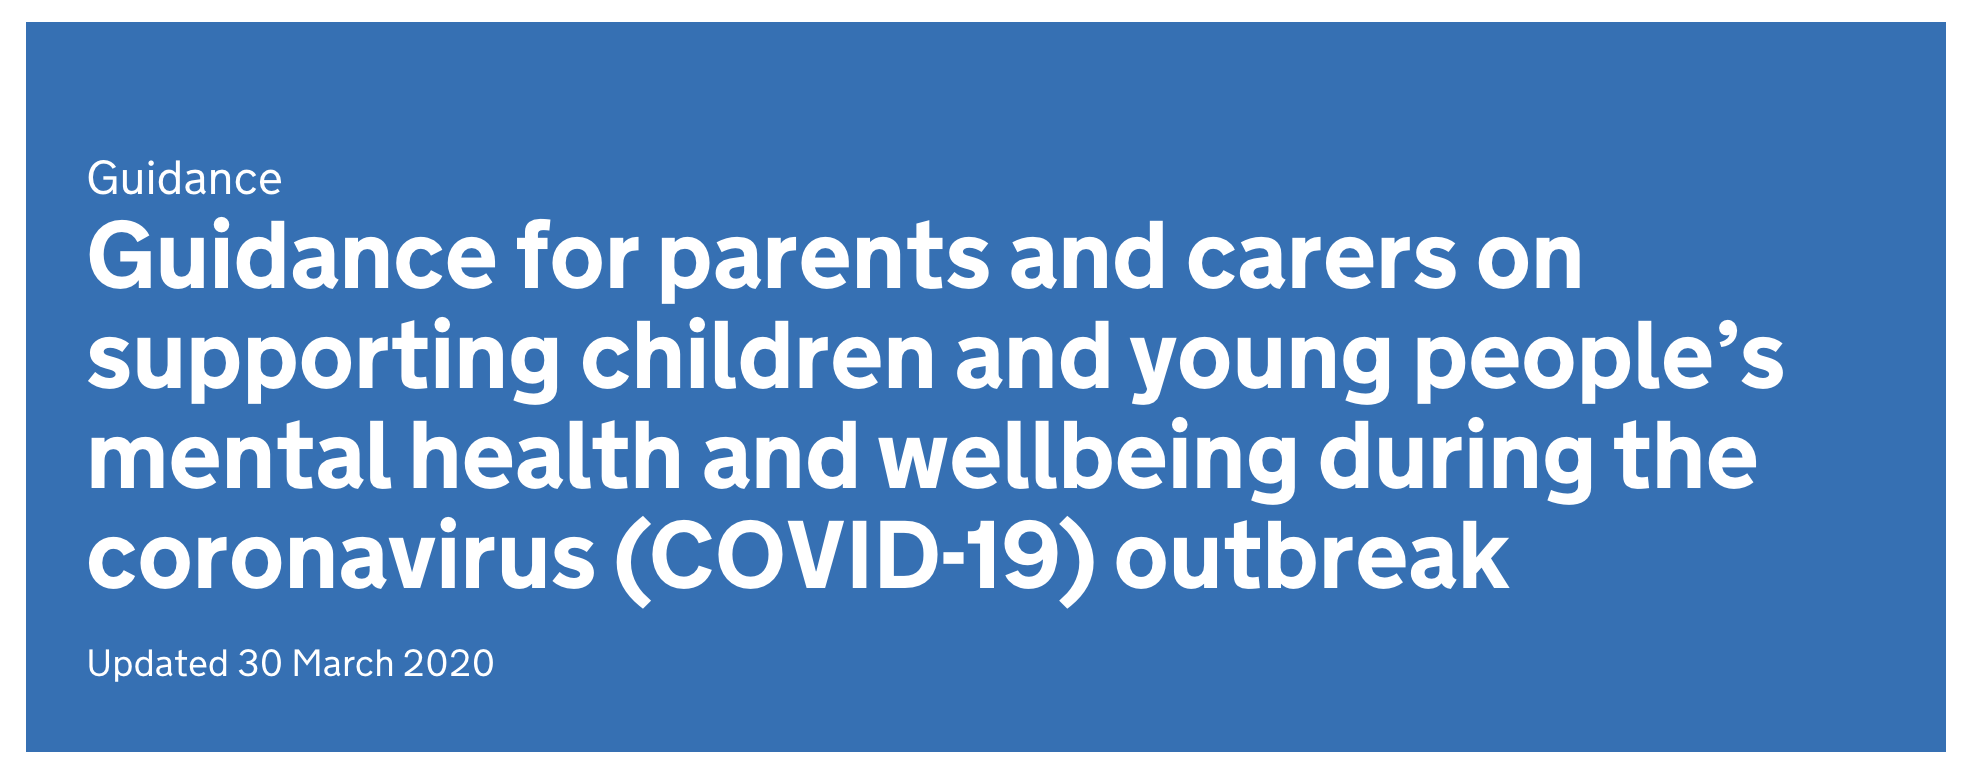 UPDATE : Guidance for parents and carers on supporting children and young people’s mental health and wellbeing during the coronavirus (COVID-19) outbreak